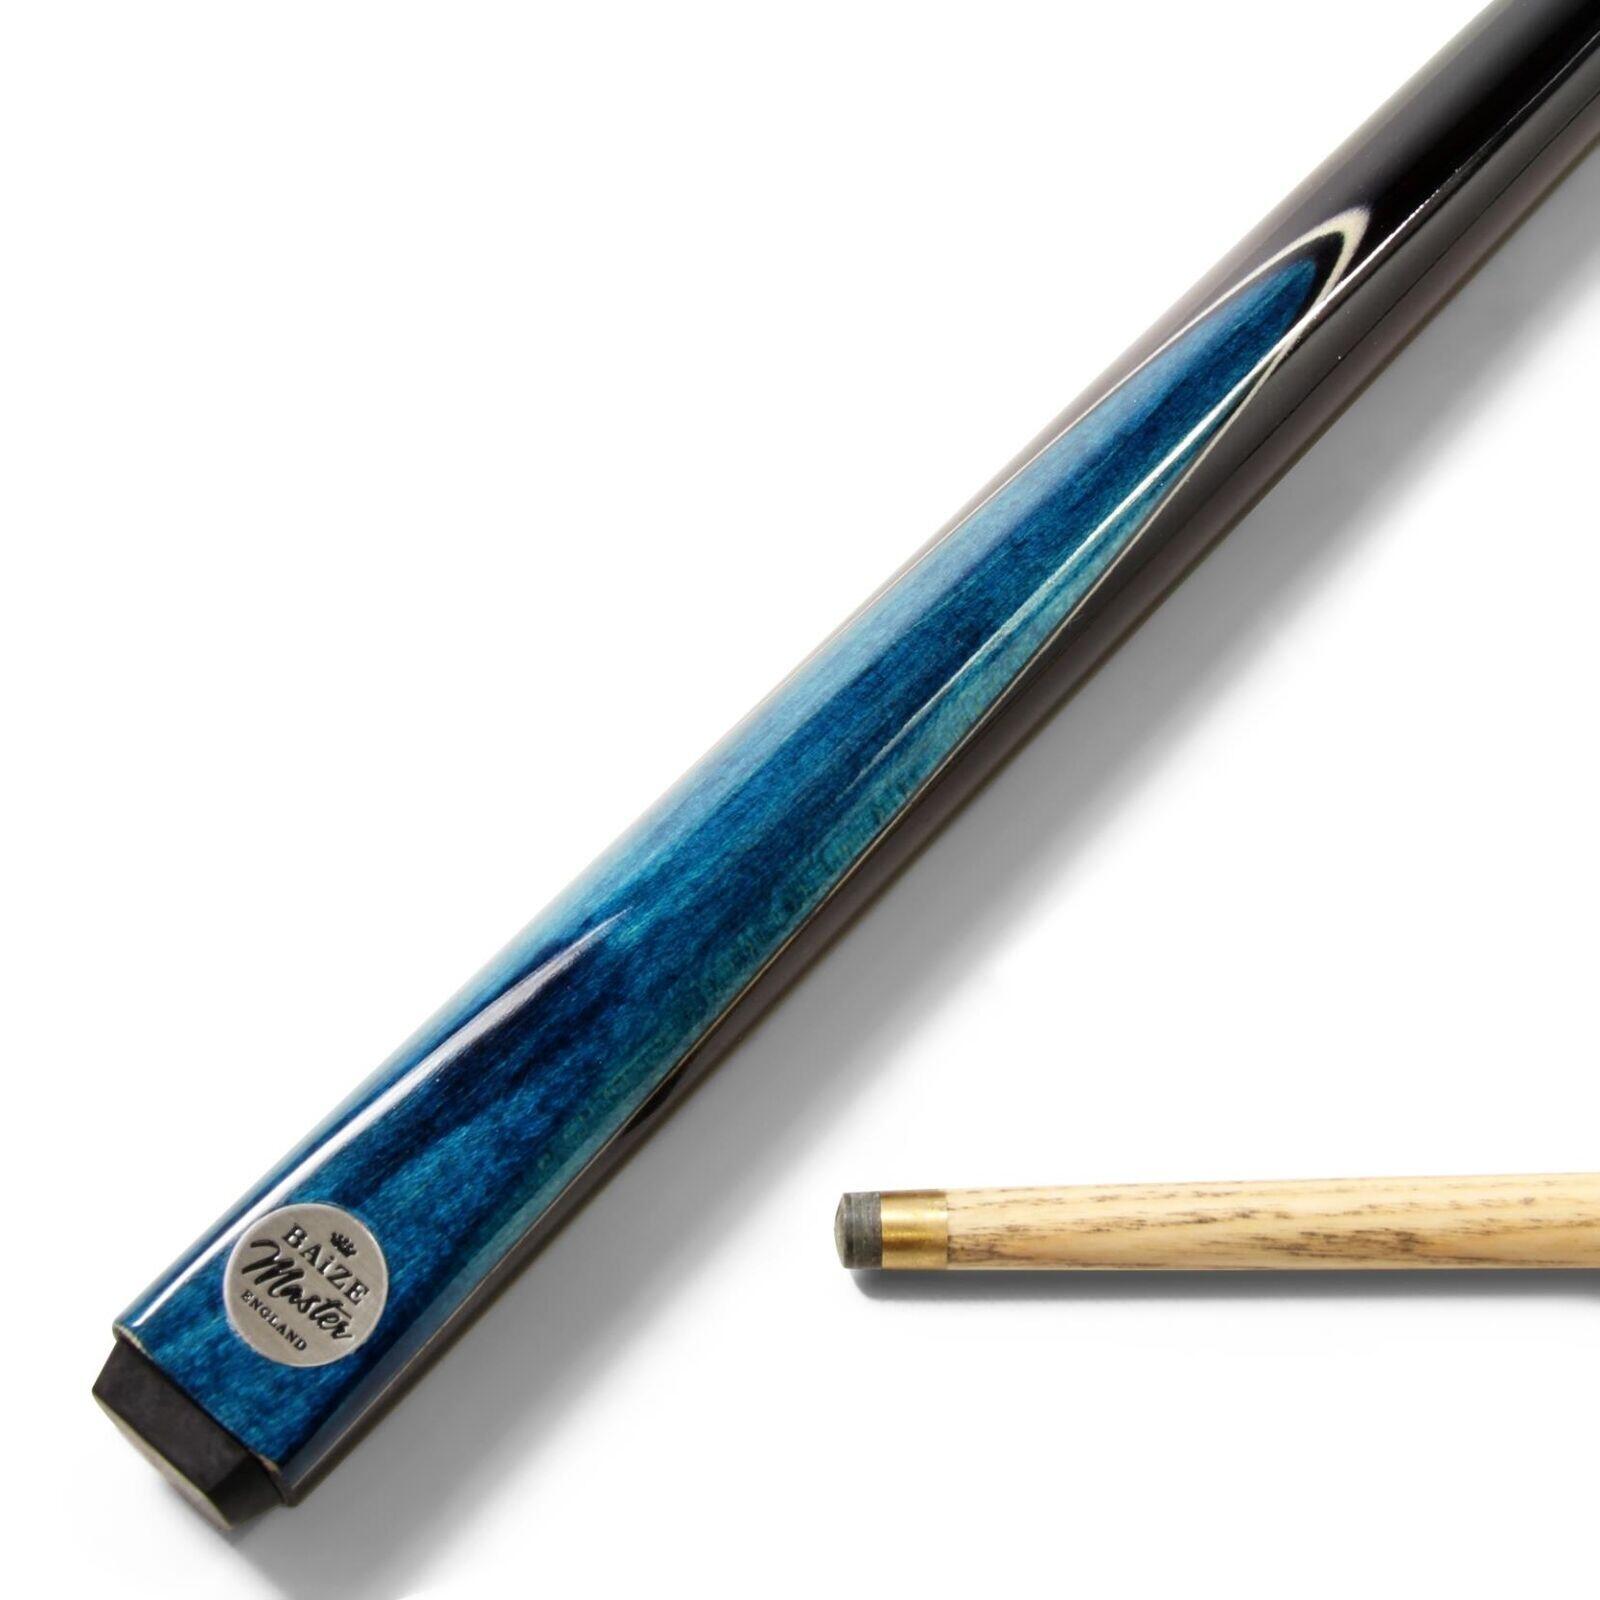 FUNKY CHALK Baize Master 57 Inch BLUE CONQUEST 2pc Snooker Pool Cue Matching Ash Shaft 9.5m